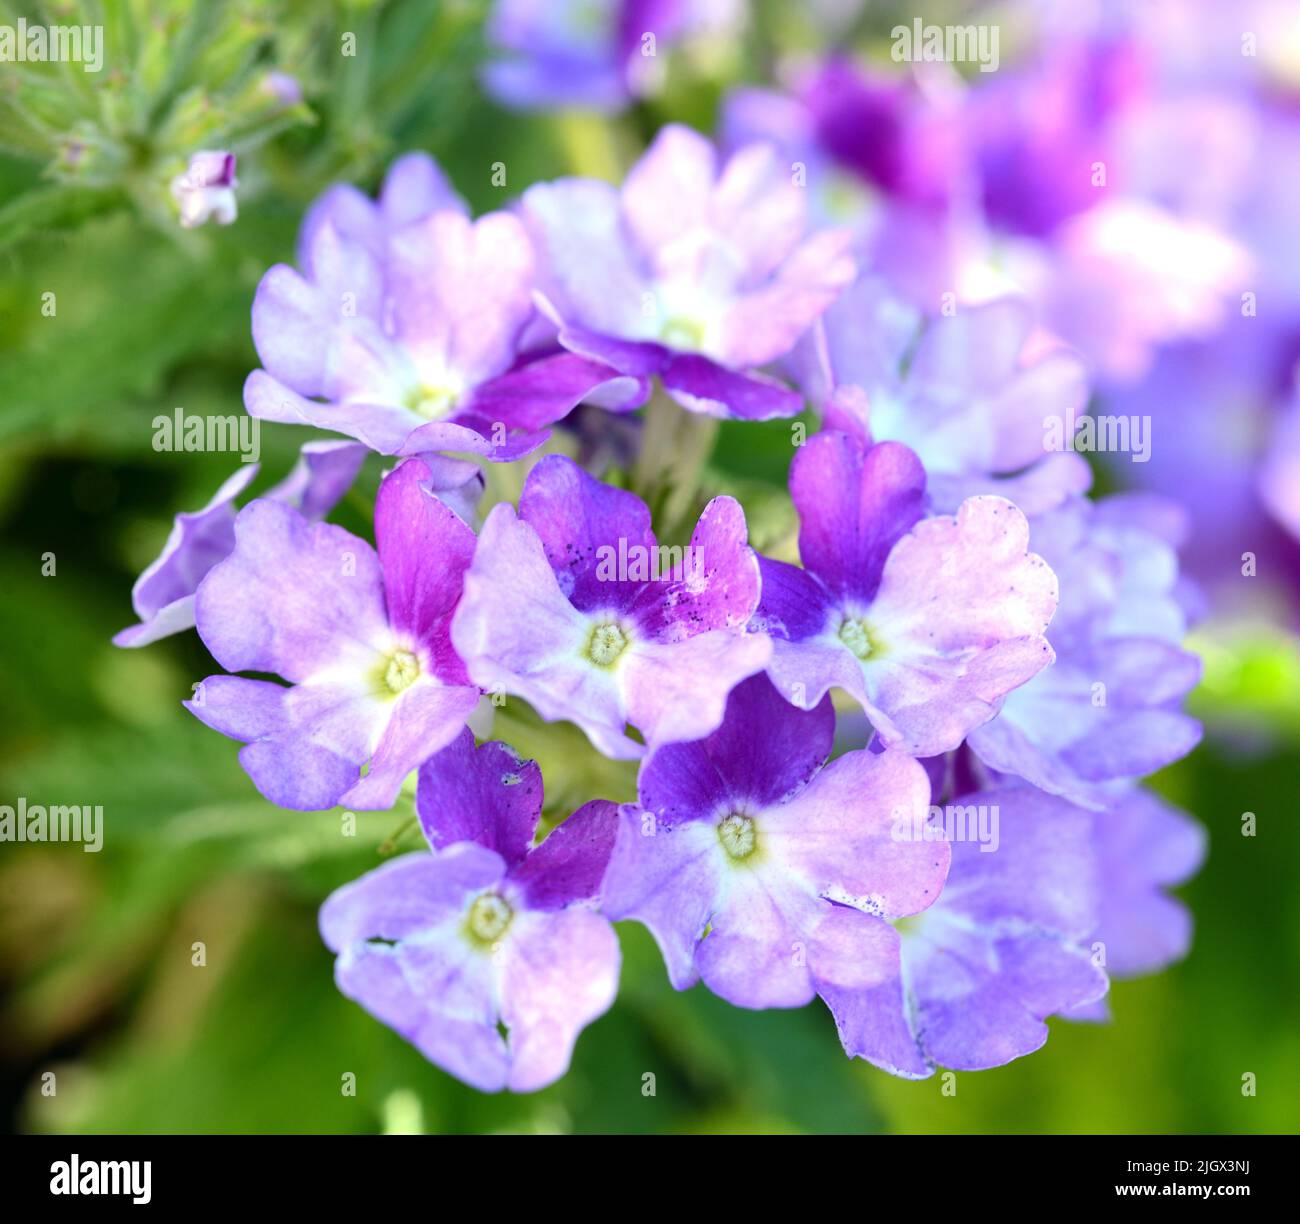 Two-toned purple Verbena flower cluster Stock Photo